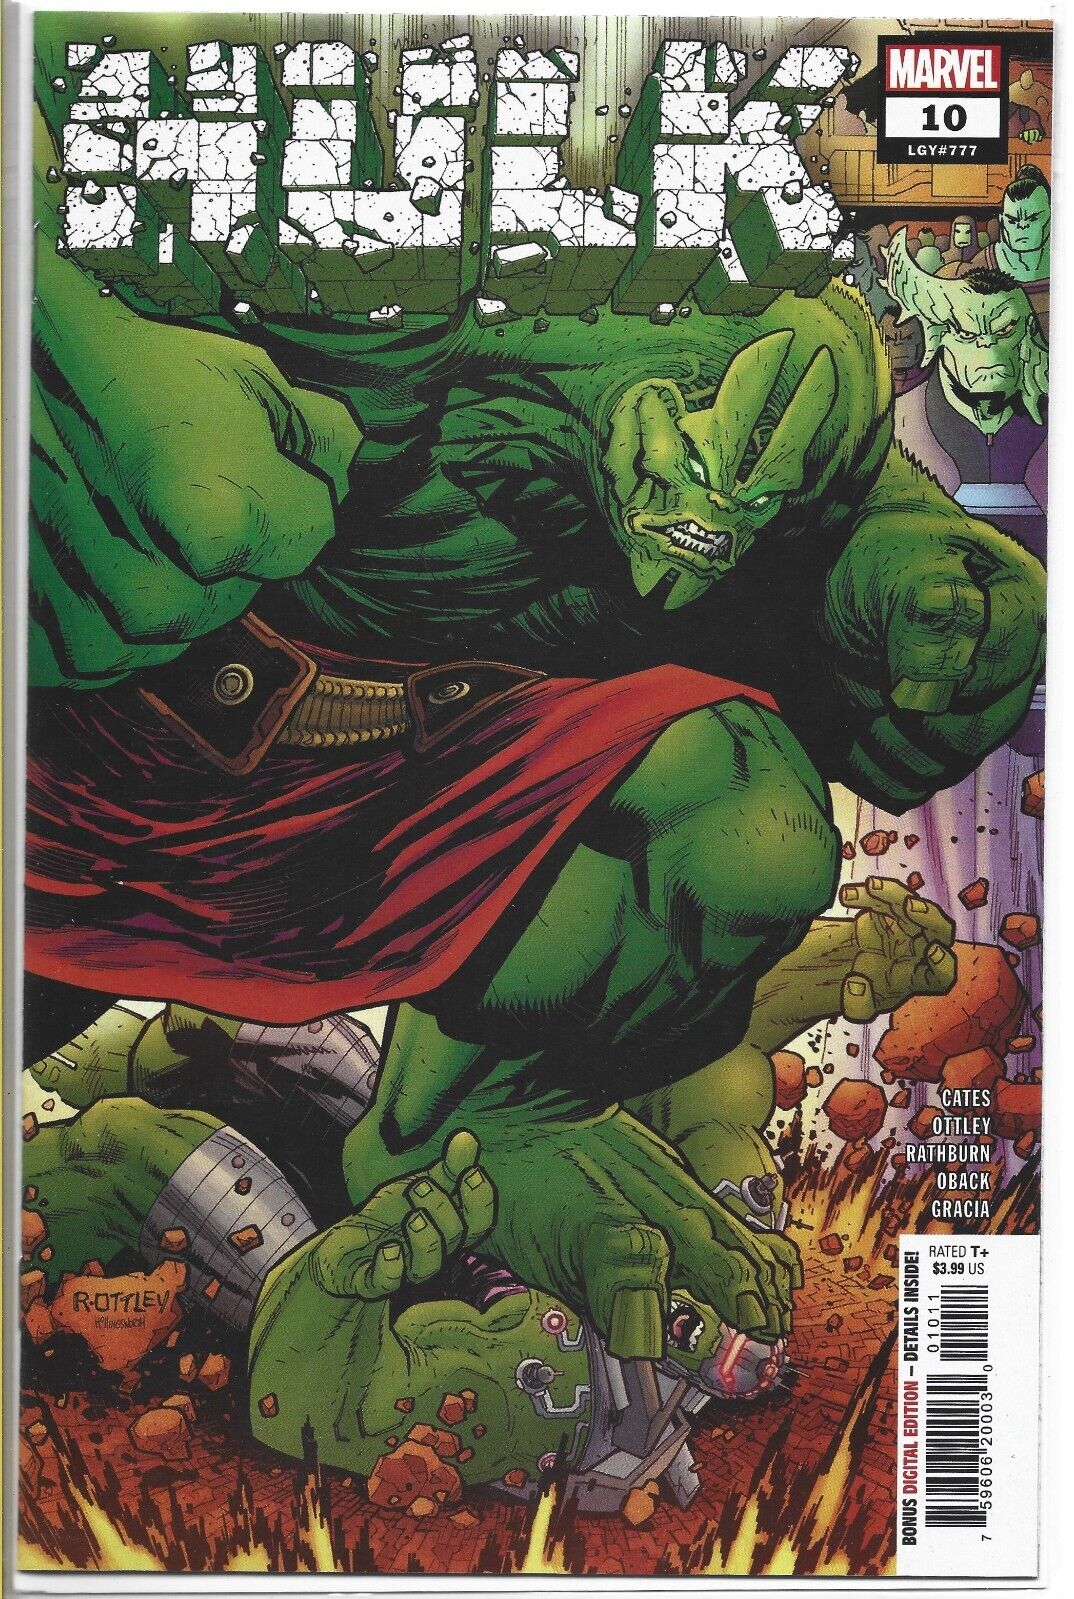 HULK #10 MARVEL COMICS 2022 NEW AND UNREAD BAGGED / BOARDED